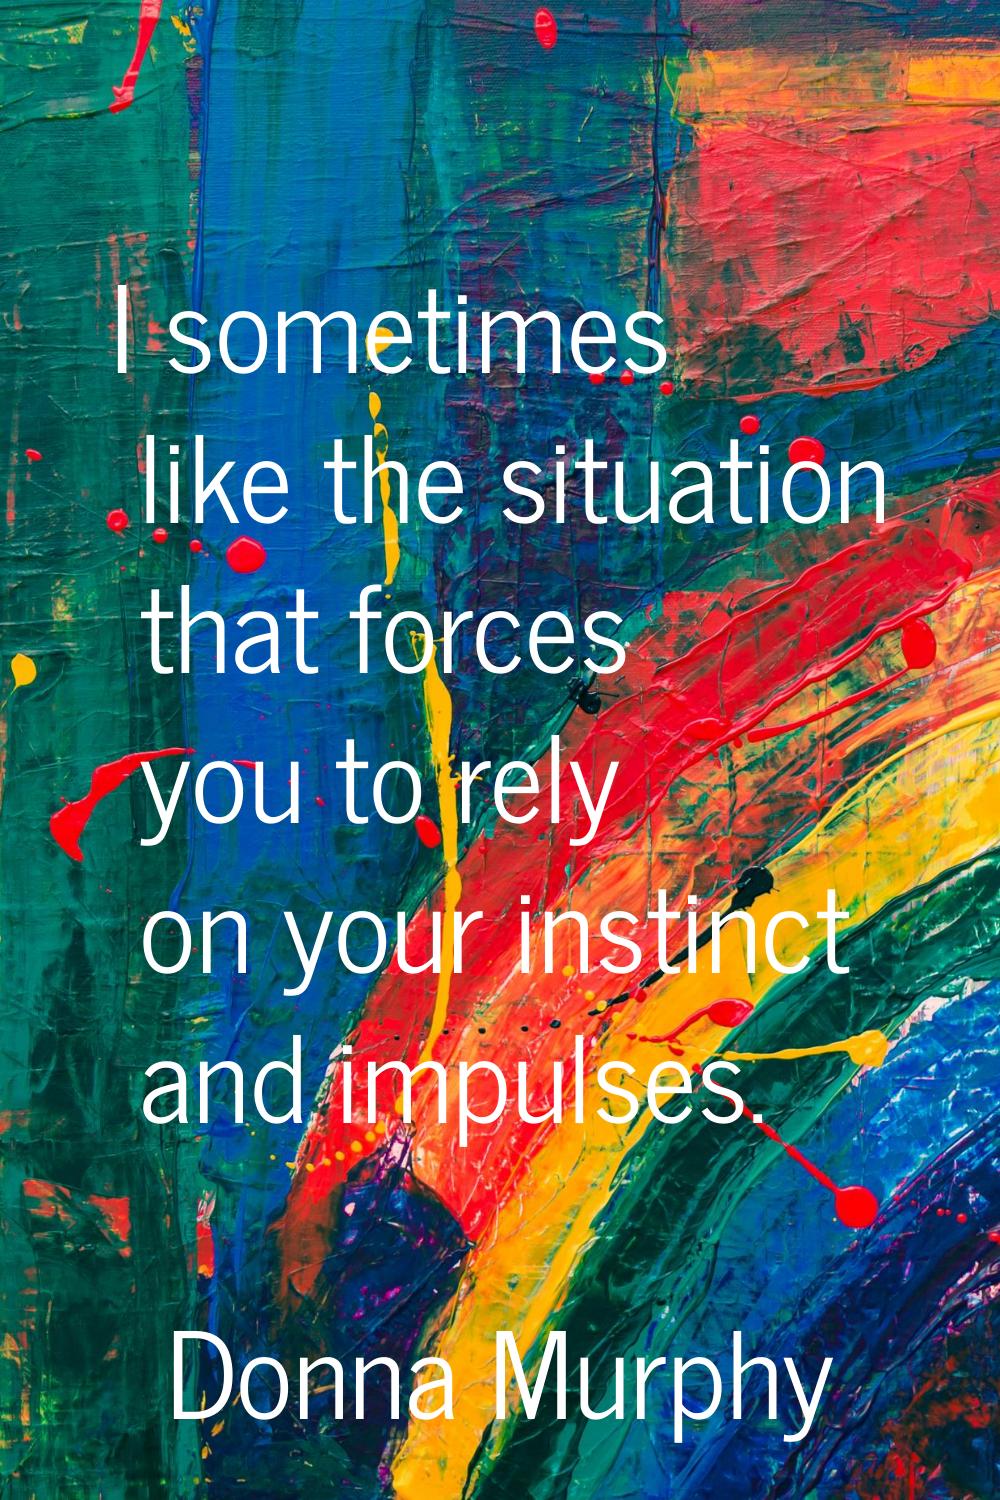 I sometimes like the situation that forces you to rely on your instinct and impulses.